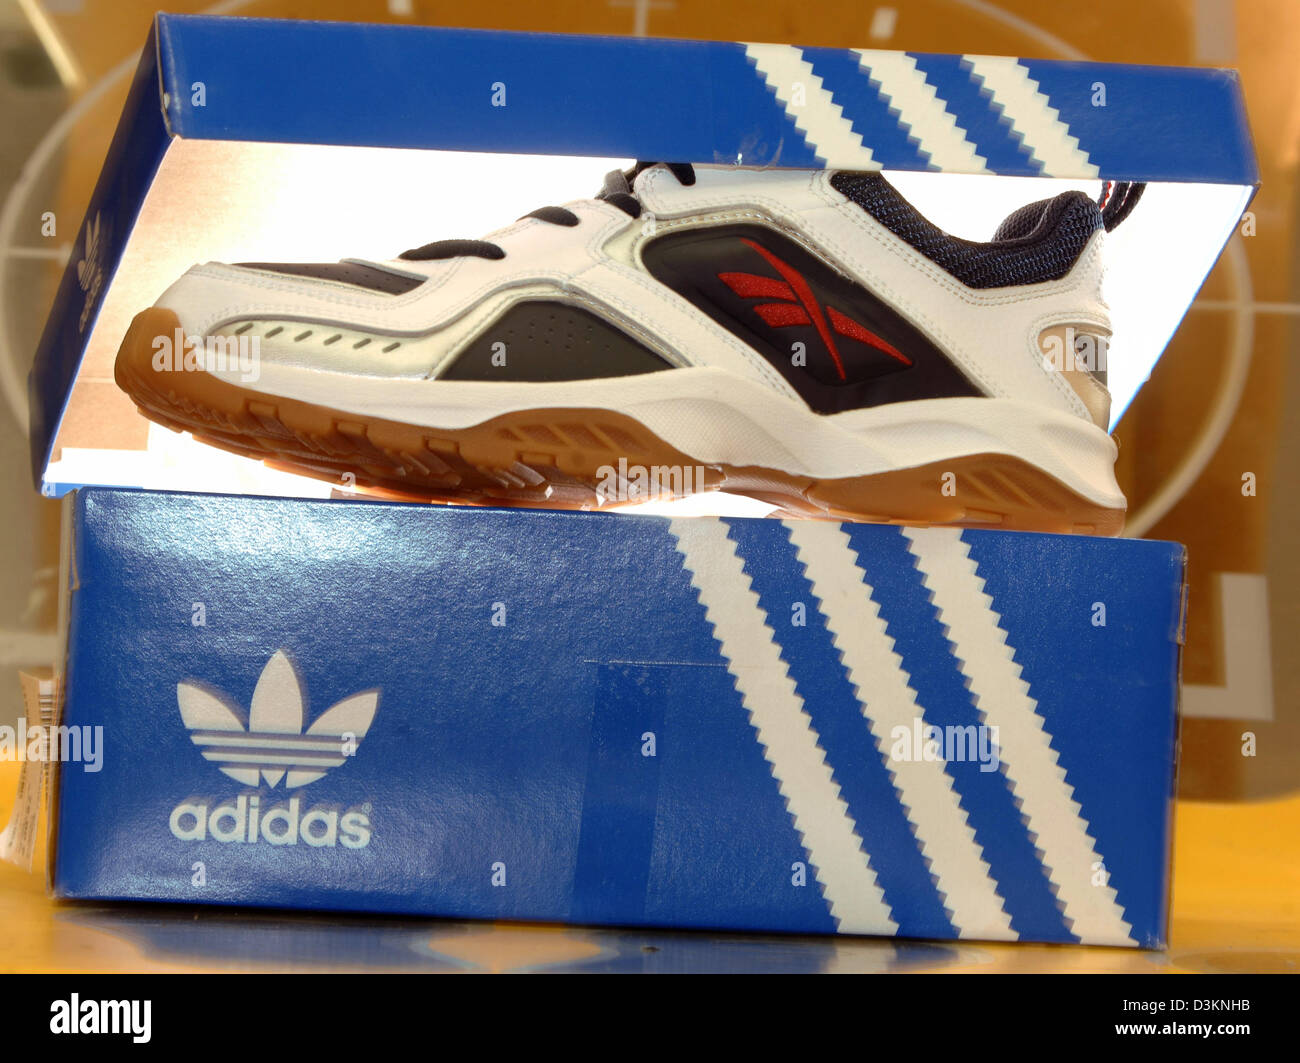 dpa) - The shows a sneaker in an shoe box in a sporting goods store Munich, Germany, Wednesday 03 August 2005. In order to bridge the gap to